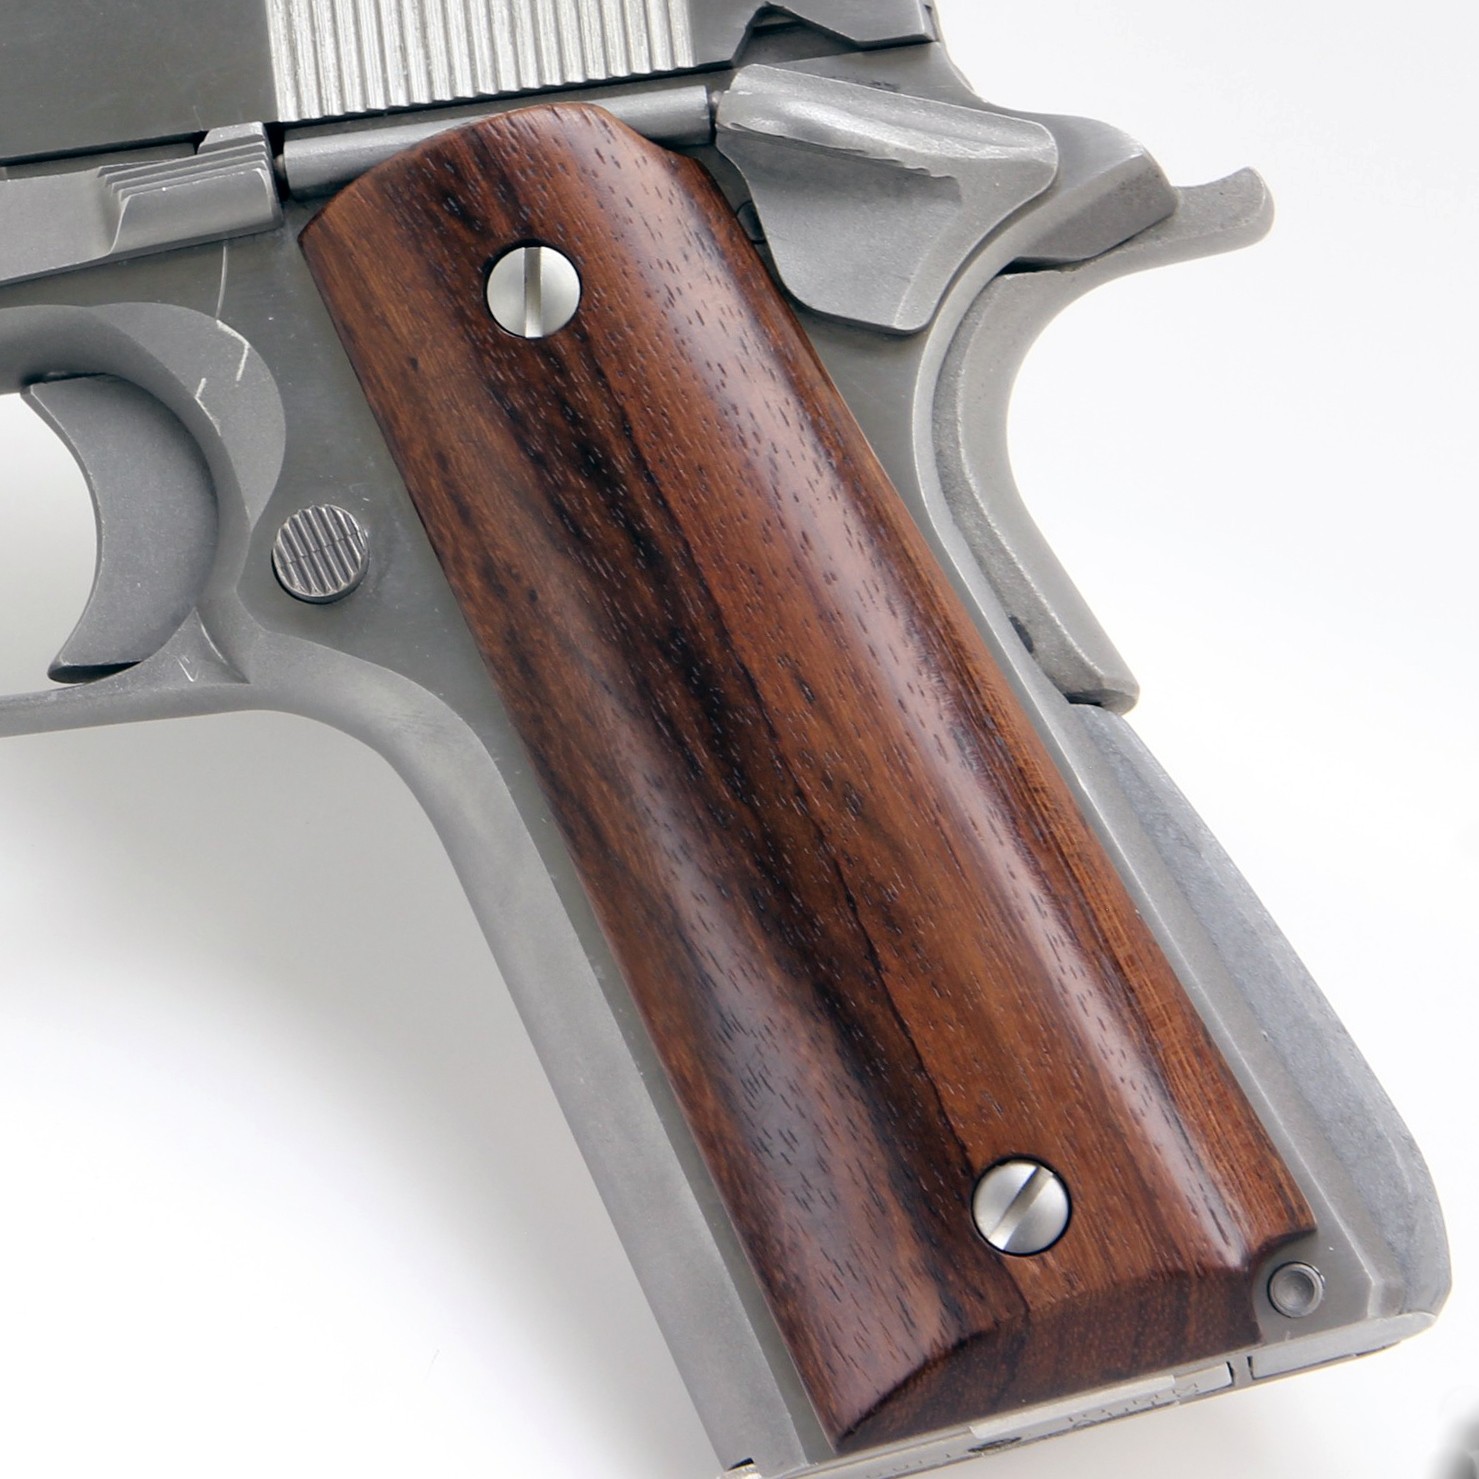 New Grip For Colt 1911 Full Size Kimber Clones All Checkered With Frame Wood 